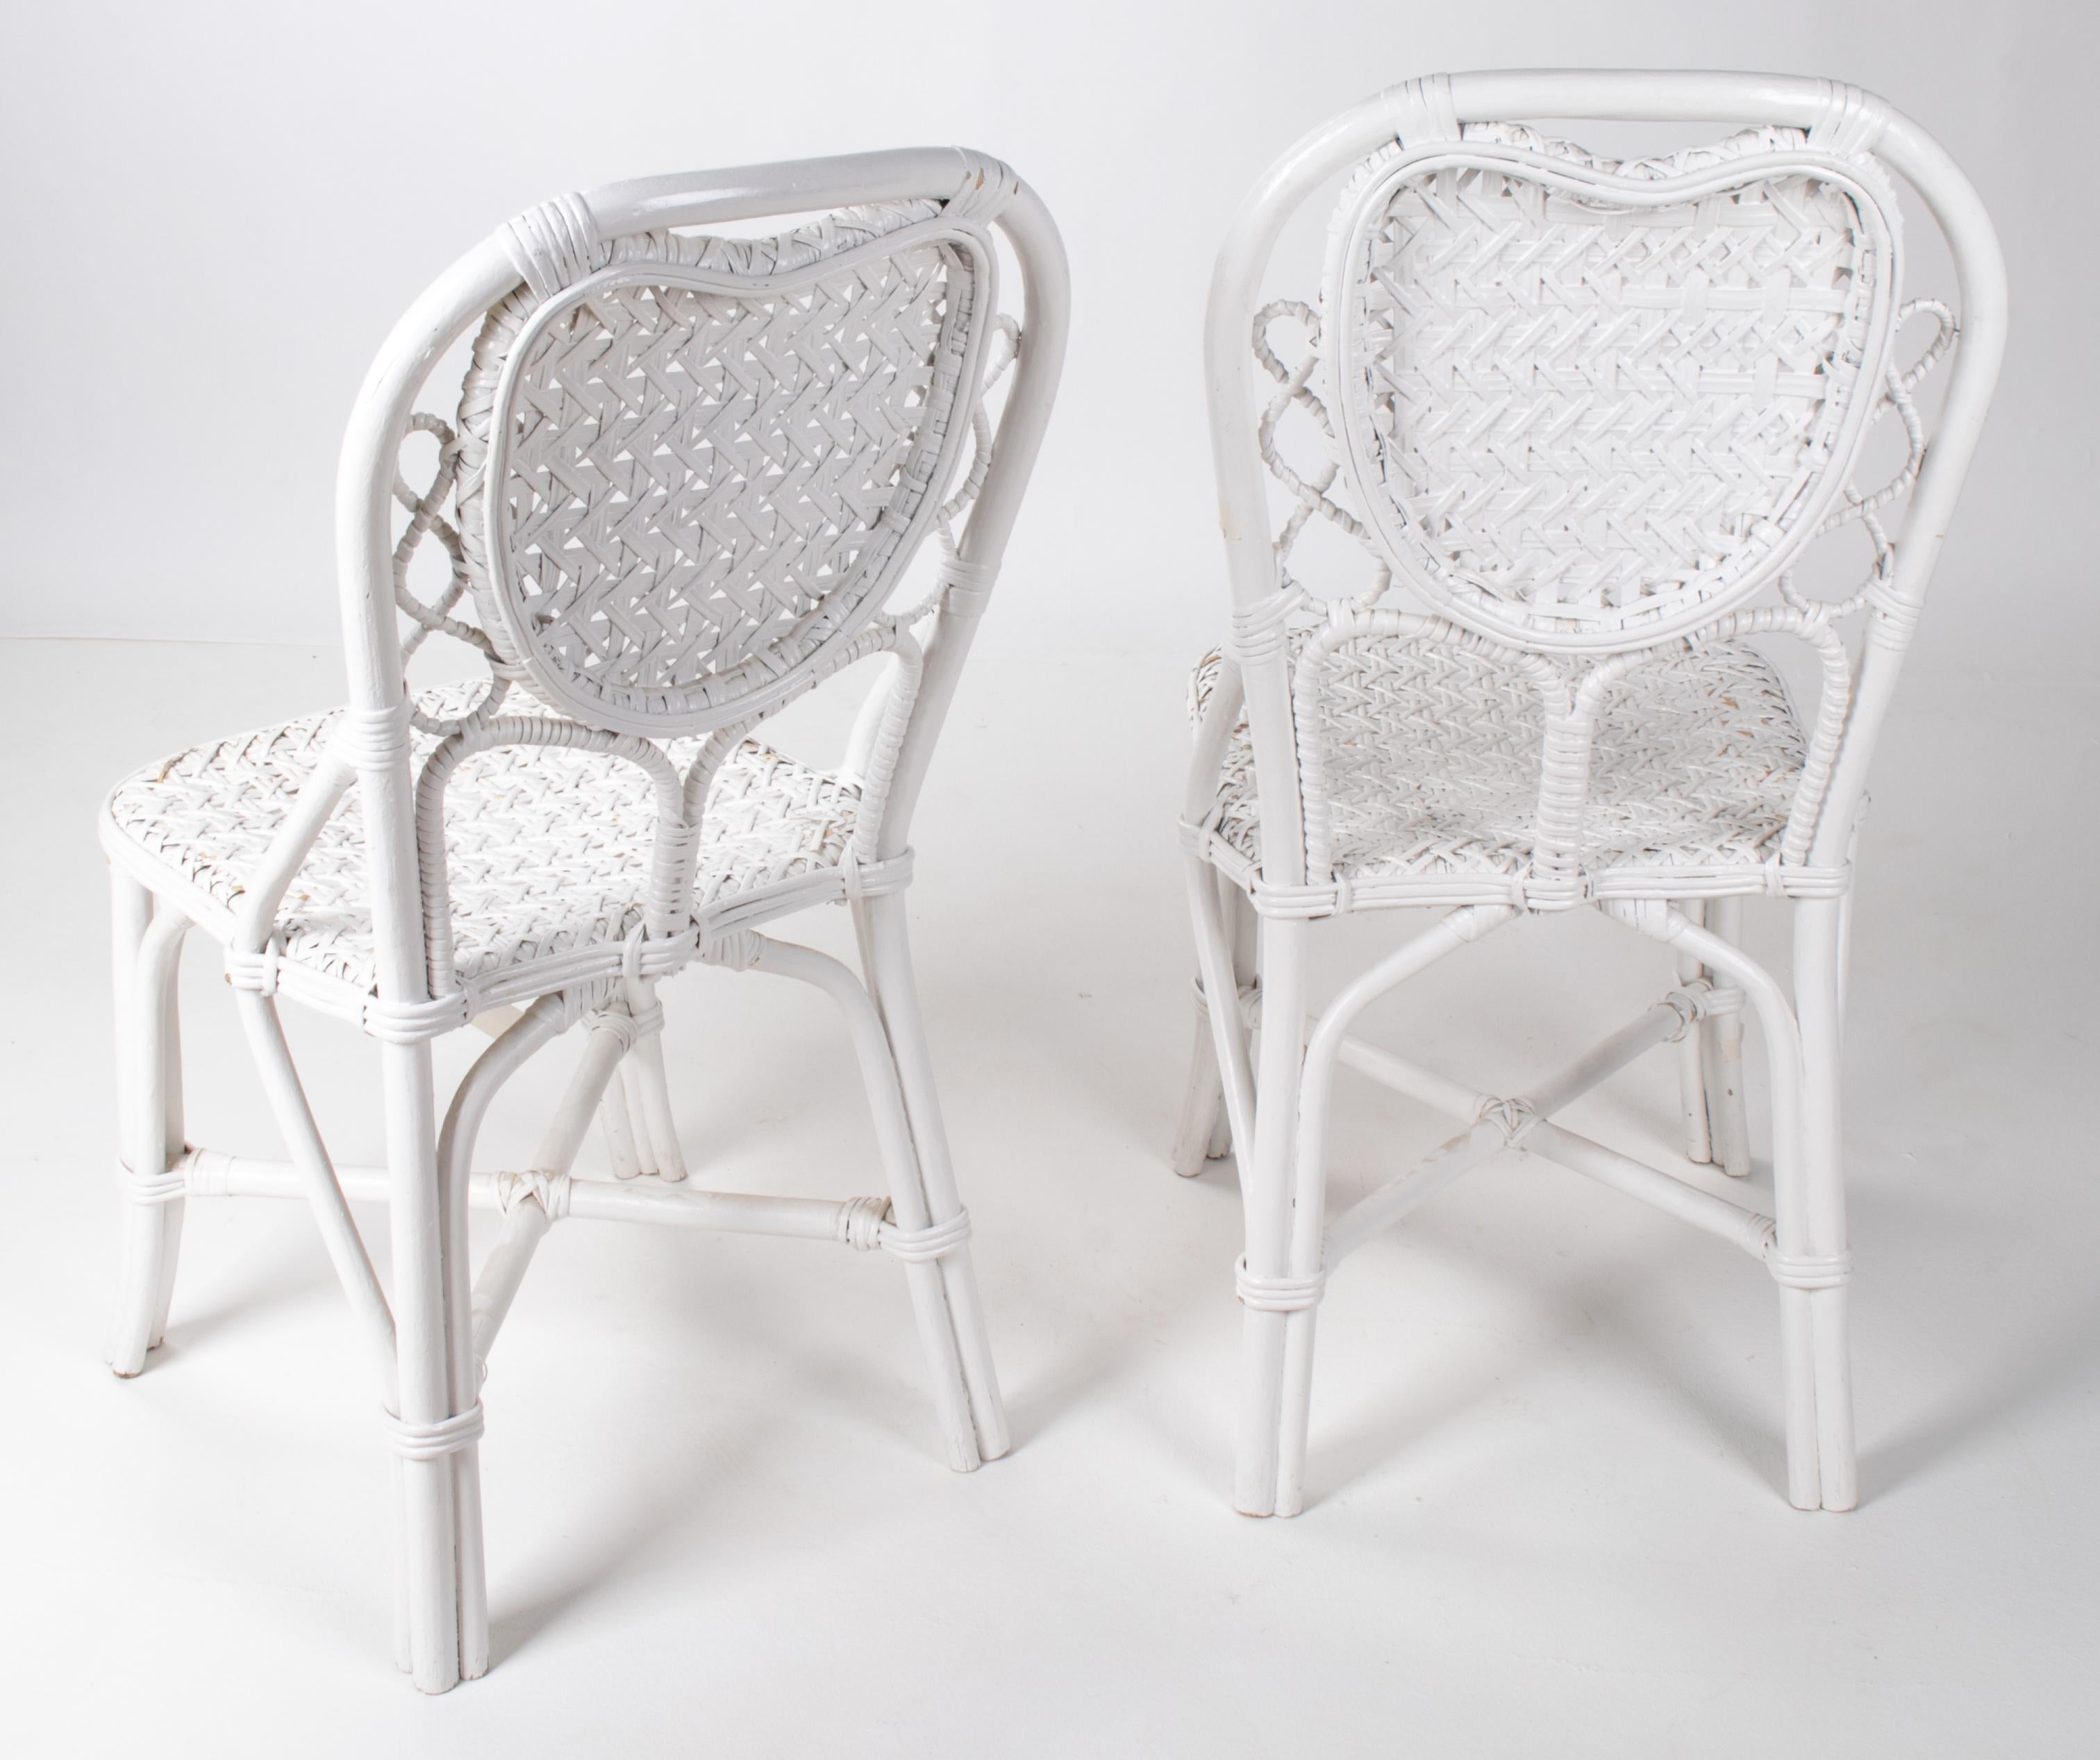 20th Century 1970s Pair of Spanish Handmade White Wicker Wooden Chairs For Sale